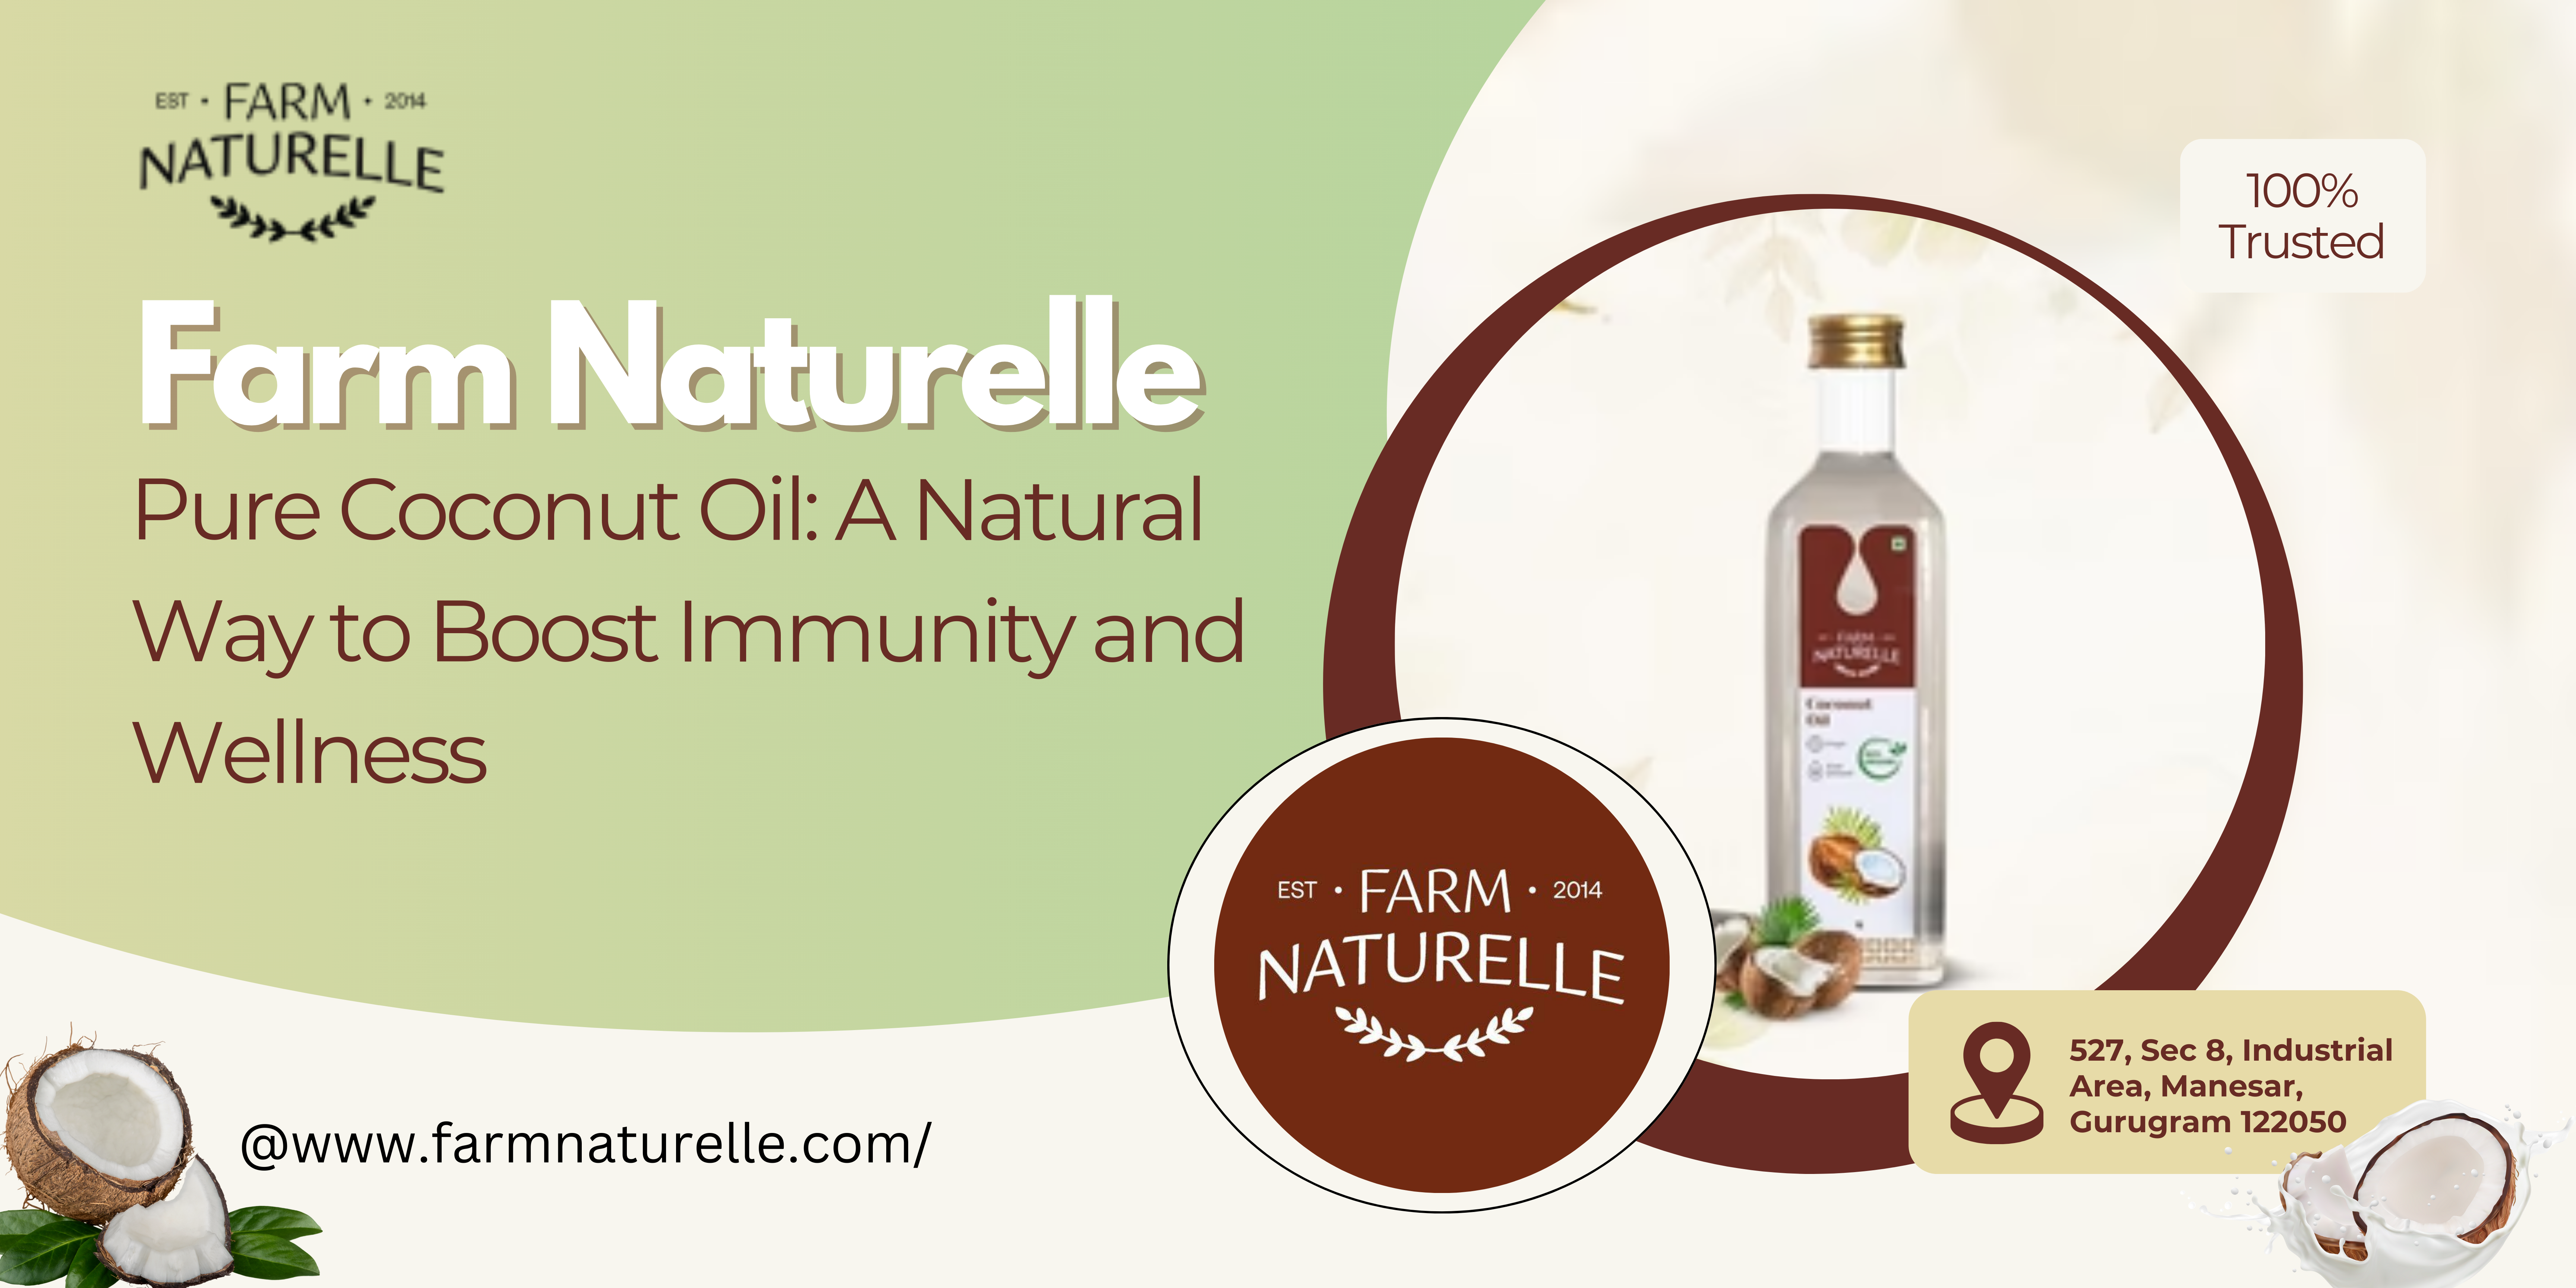 Farm Naturelle Pure Coconut Oil: A Natural Way to Boost Immunity and Wellness – Farm Naturelle